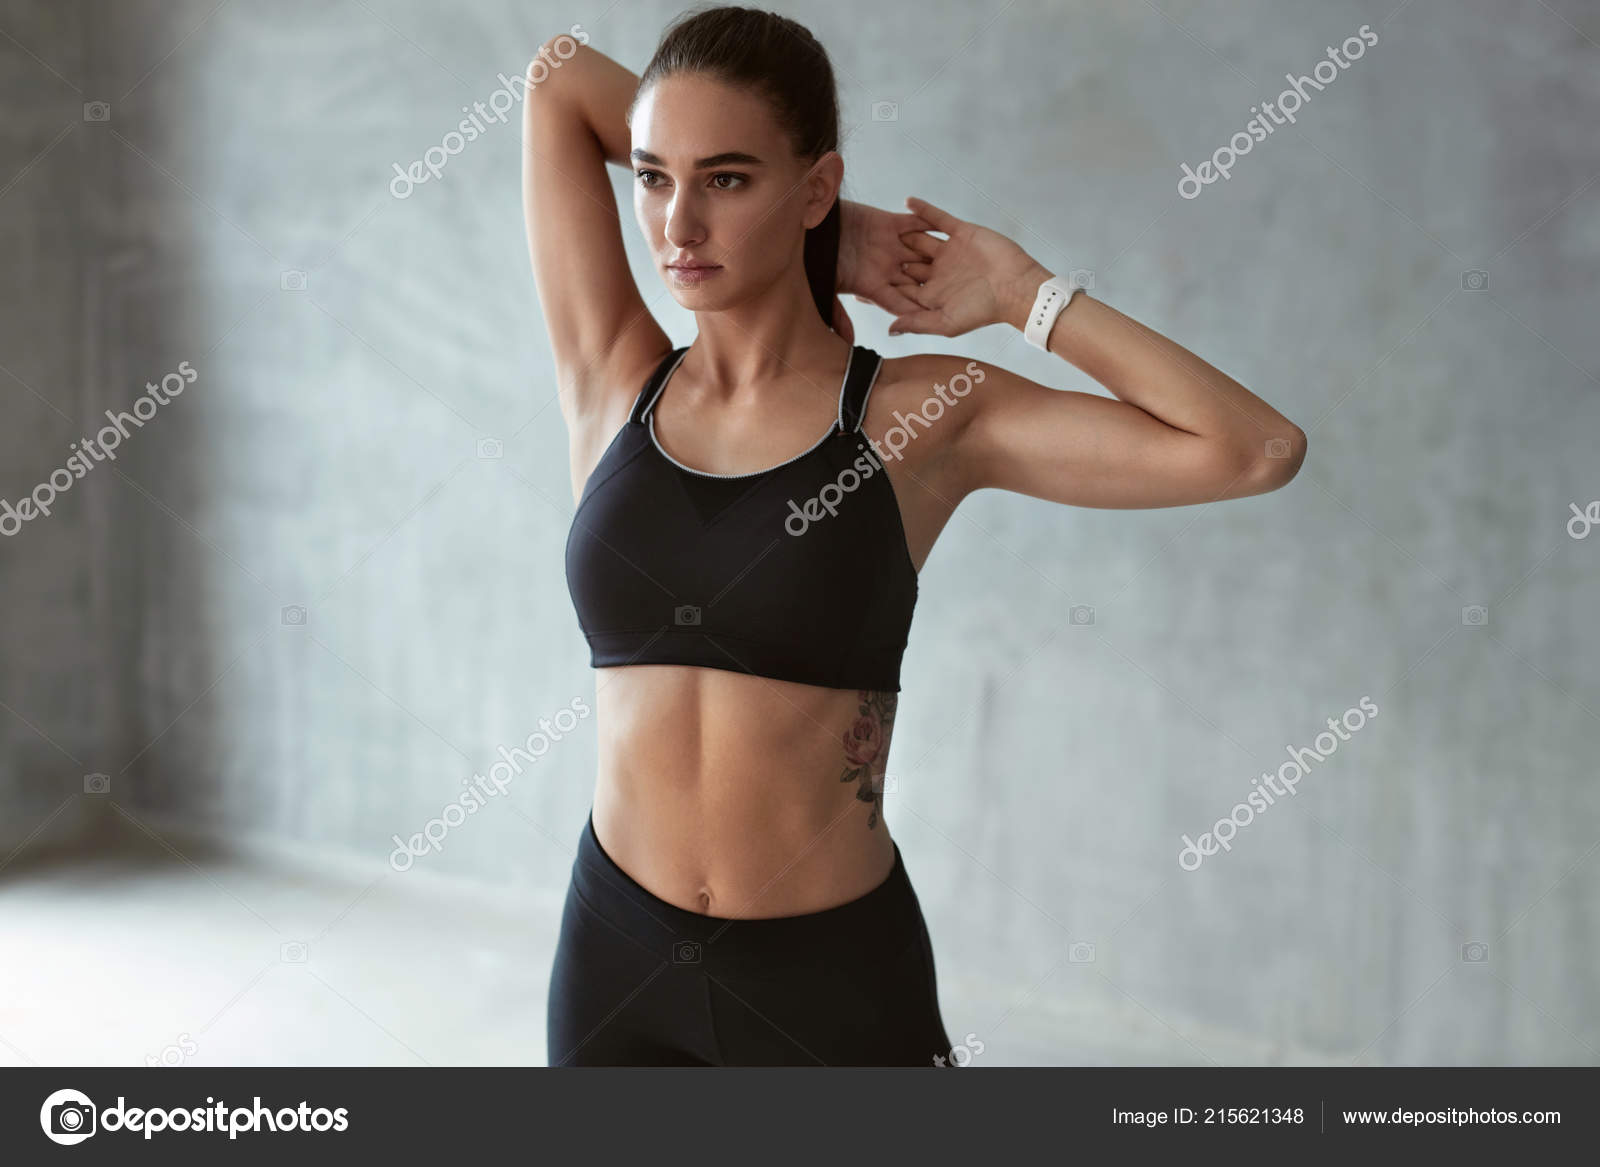 Woman in Black Sports Bra Arms Up Punch Stock Image - Image of exercise,  muscle: 47516327